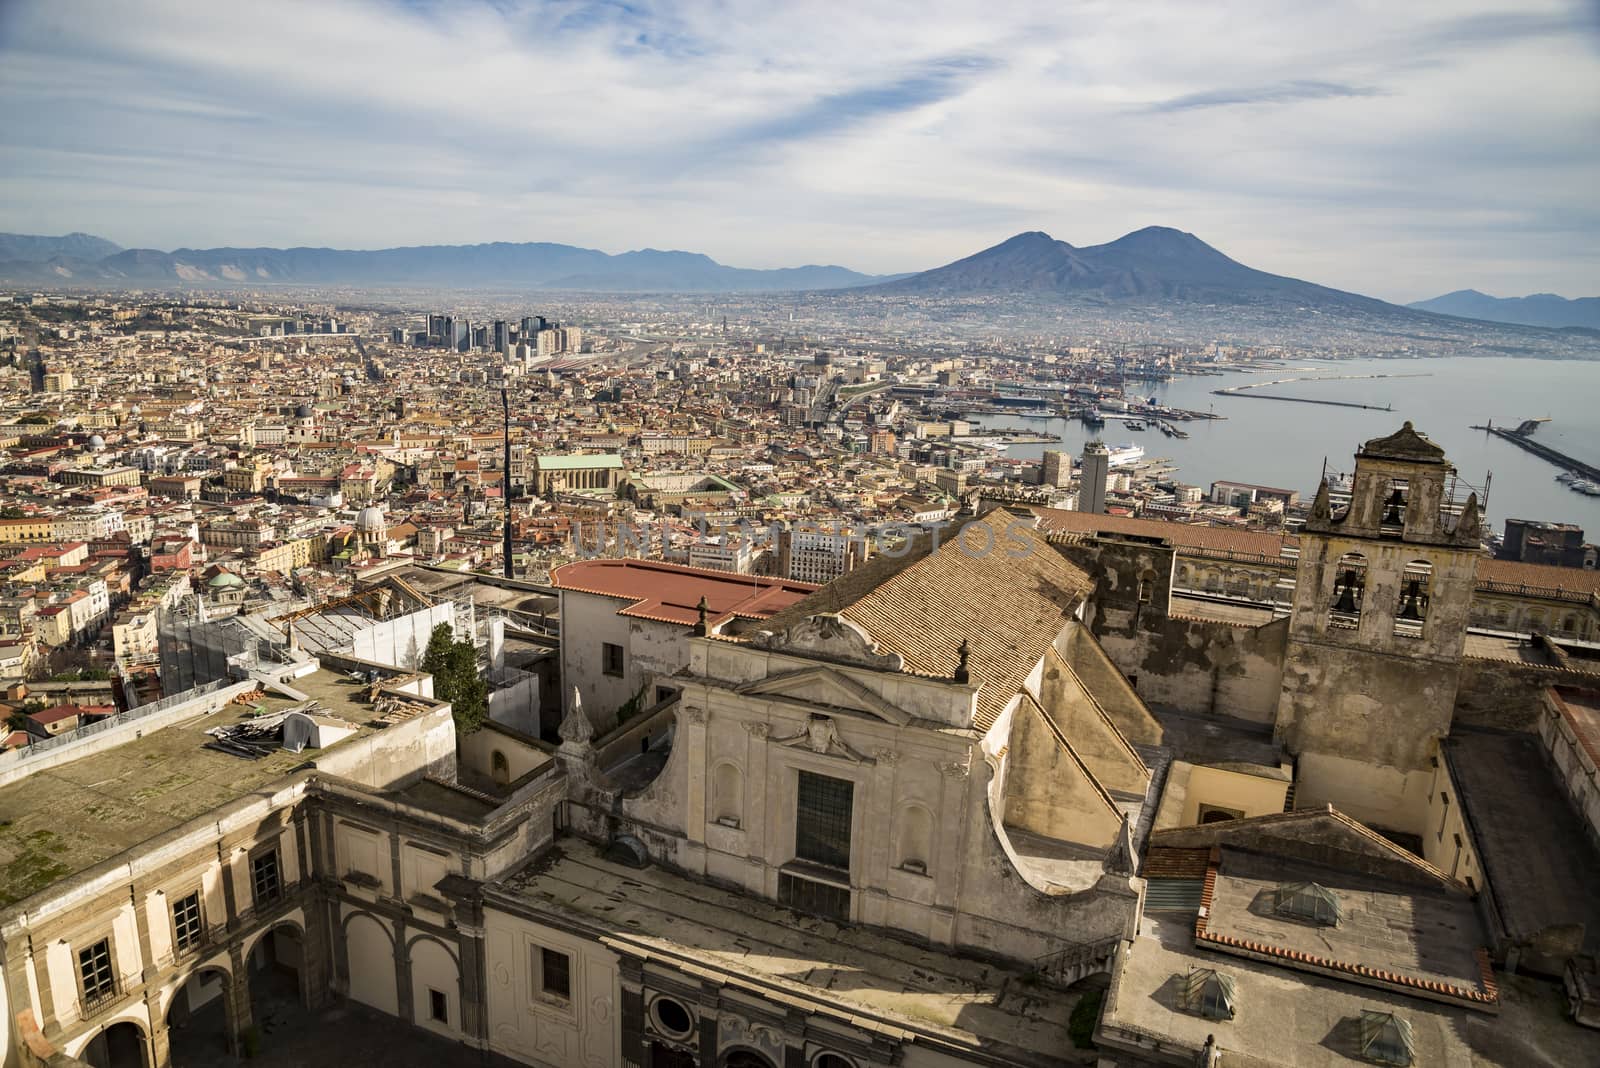 View of Naples from Castle Sant Elmo, Campania, Italy